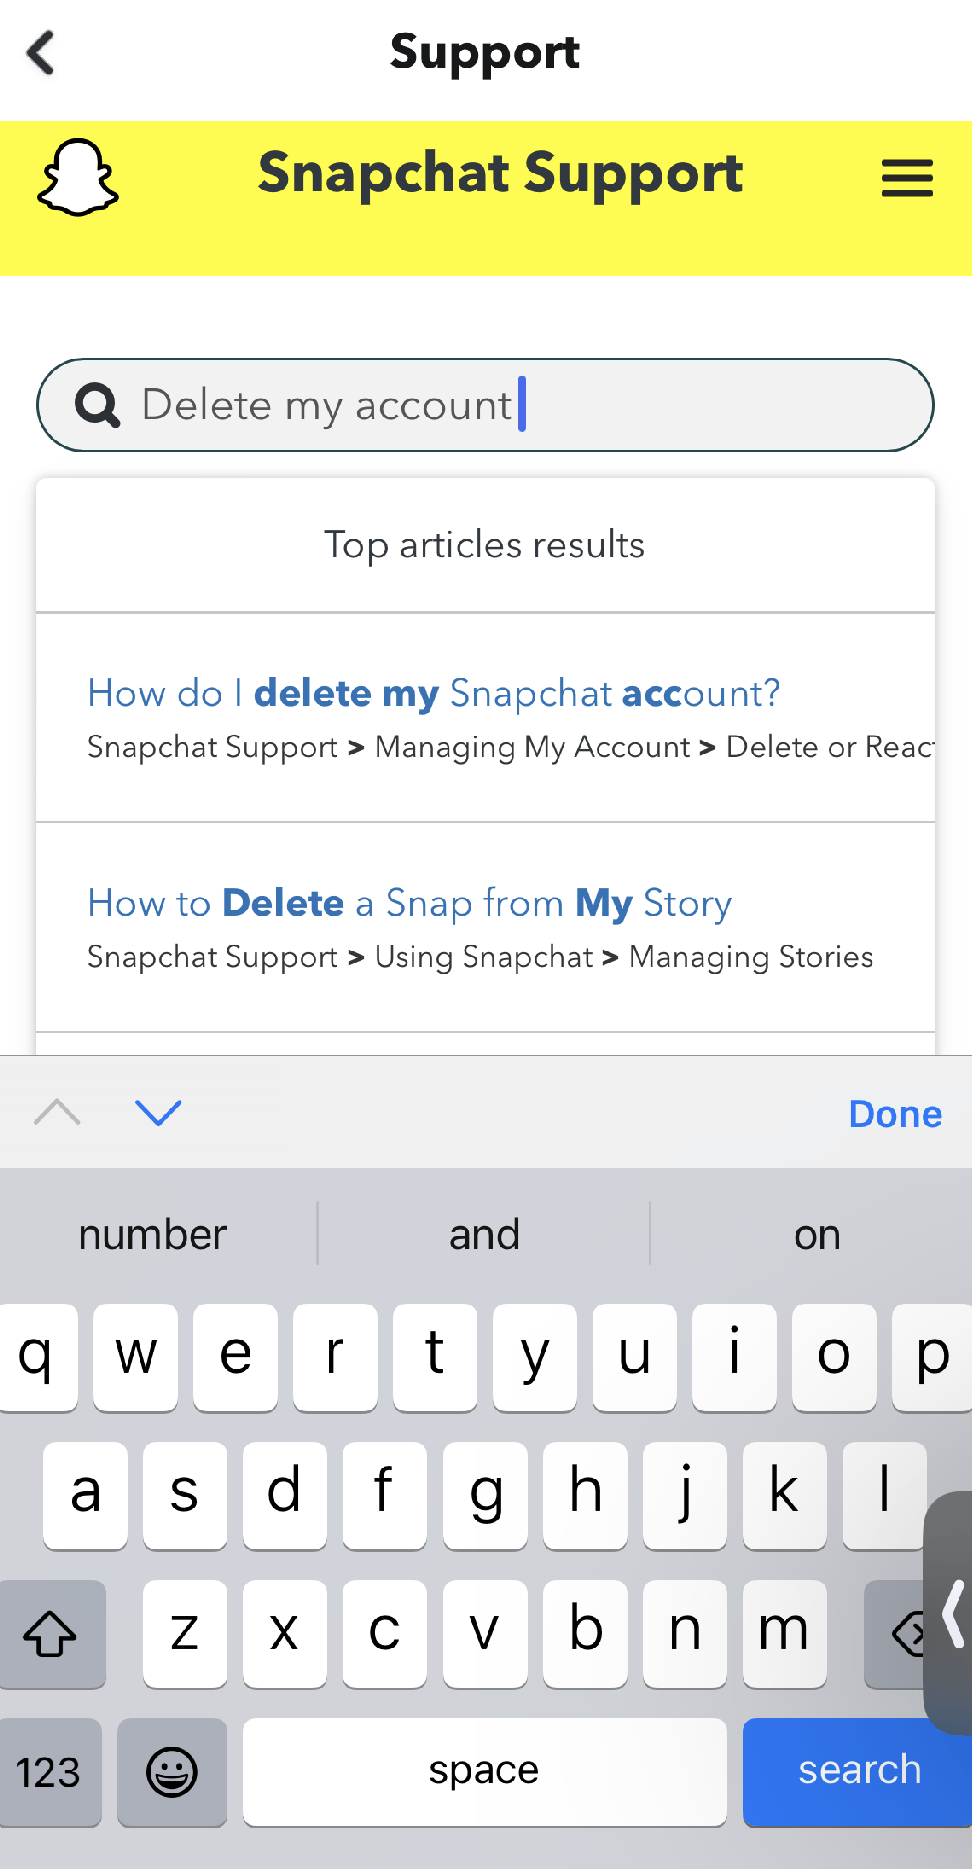 Enter "Delete My Account" in the Help Centre's search field,